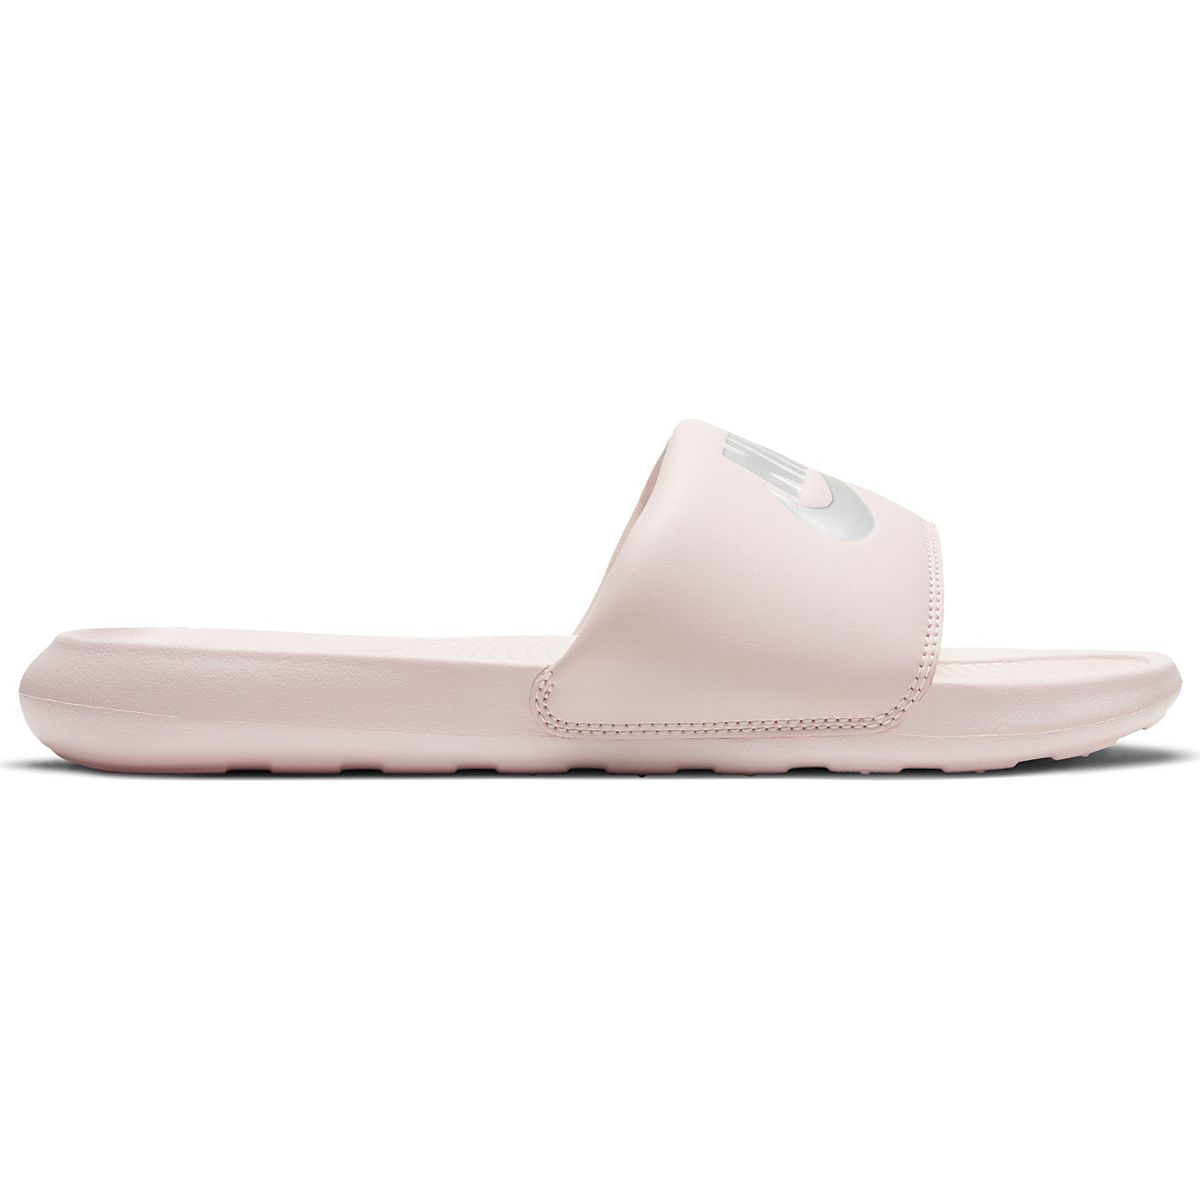 Nike Women's Victori One Slides | Free Shipping at Academy